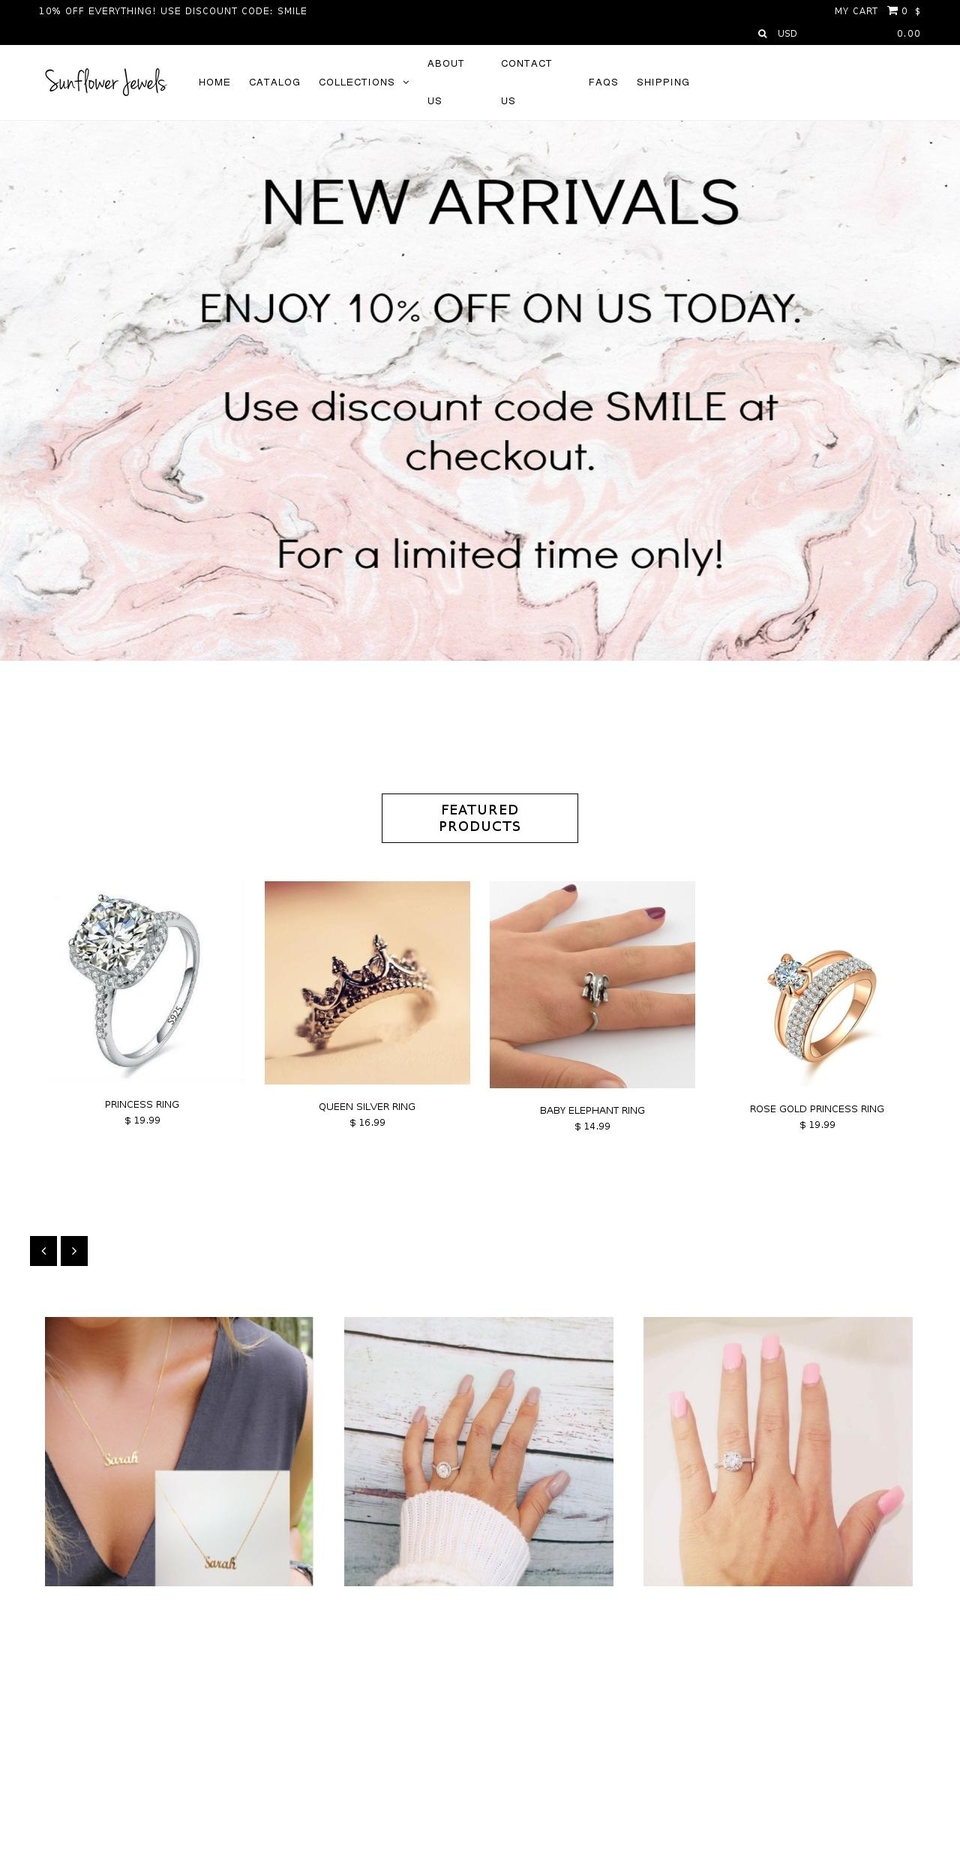 Custom Theme NEW* with Installments message Shopify theme site example sunflowerjewels.com